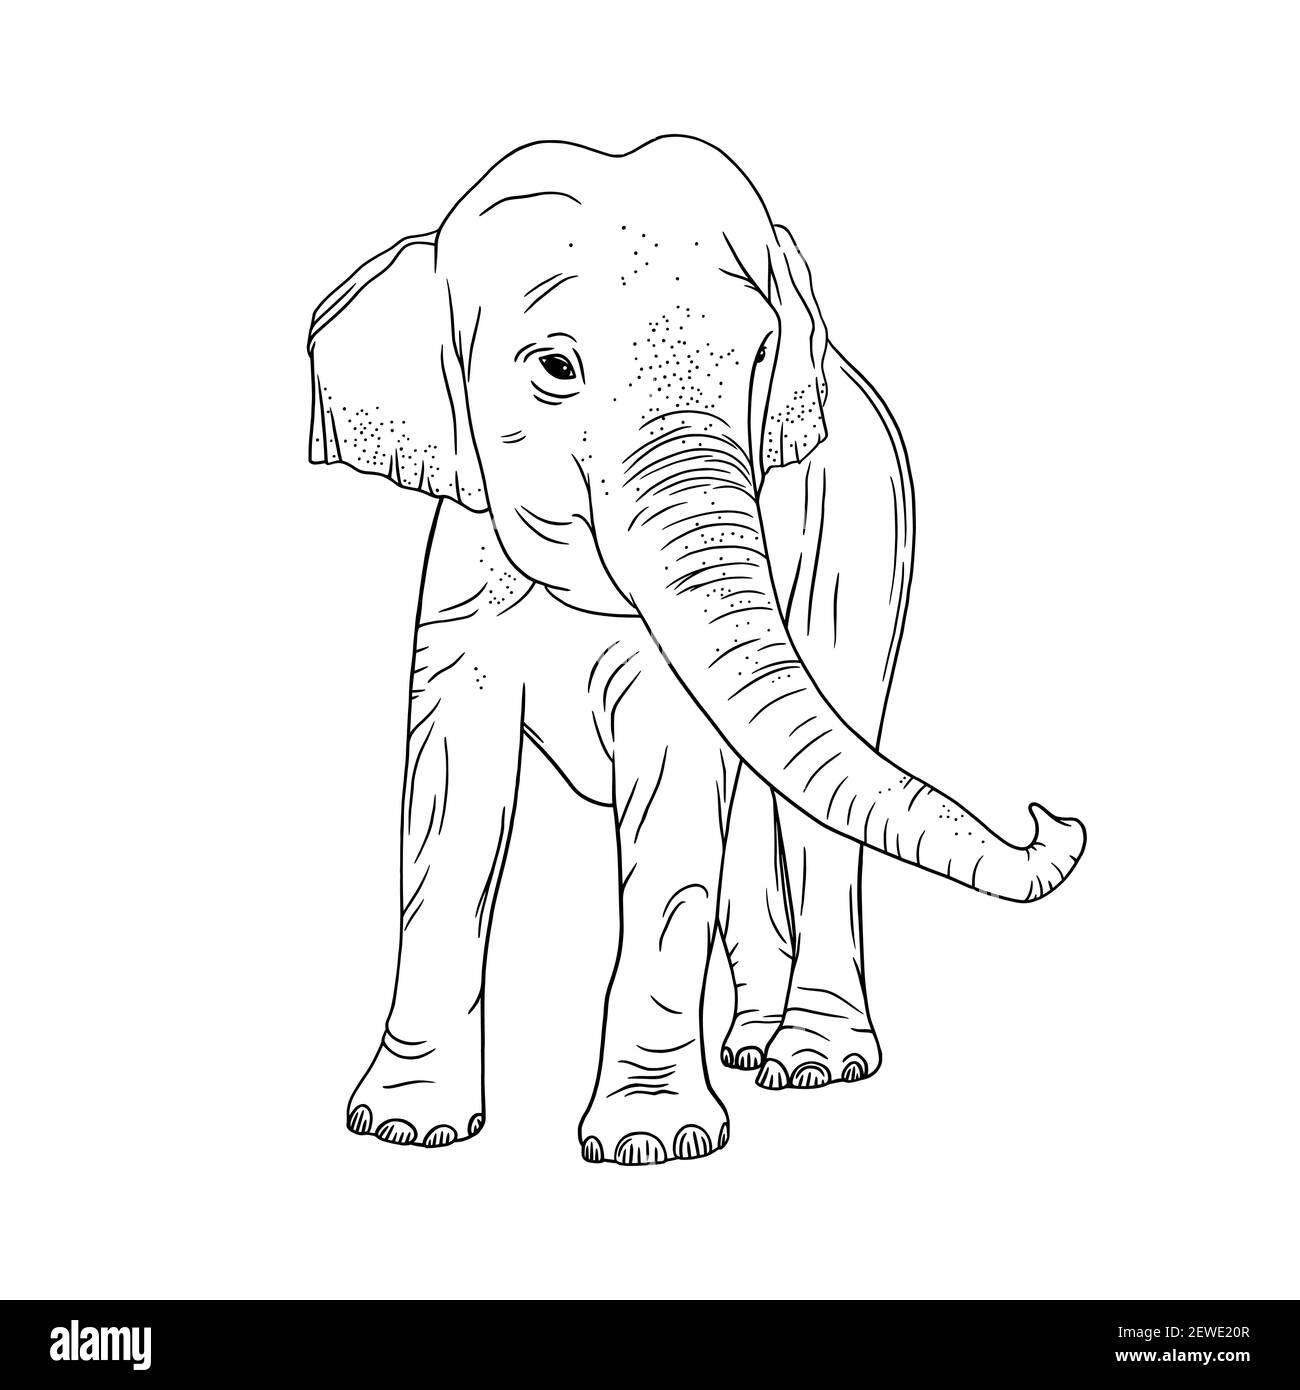 Elephant isolated on white background. Realistic Indian elephant with upturned trunk. Sketch vector illustration Stock Vector